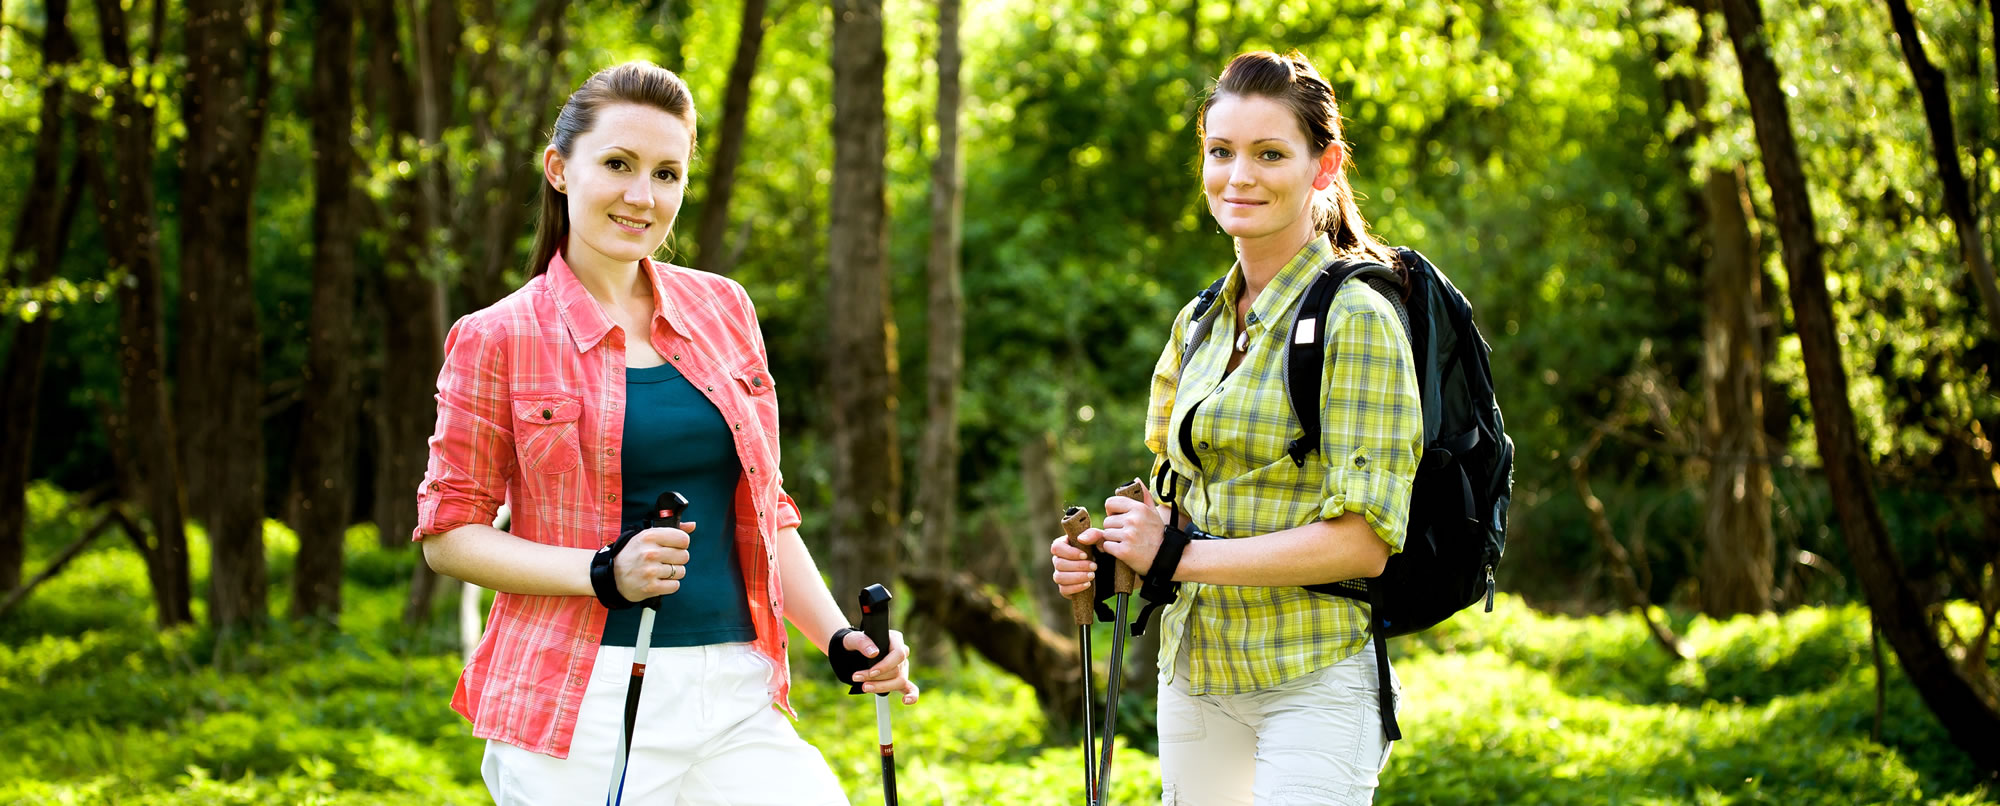 Nordic walking on holiday in the Lungau holiday region © Shutterstock